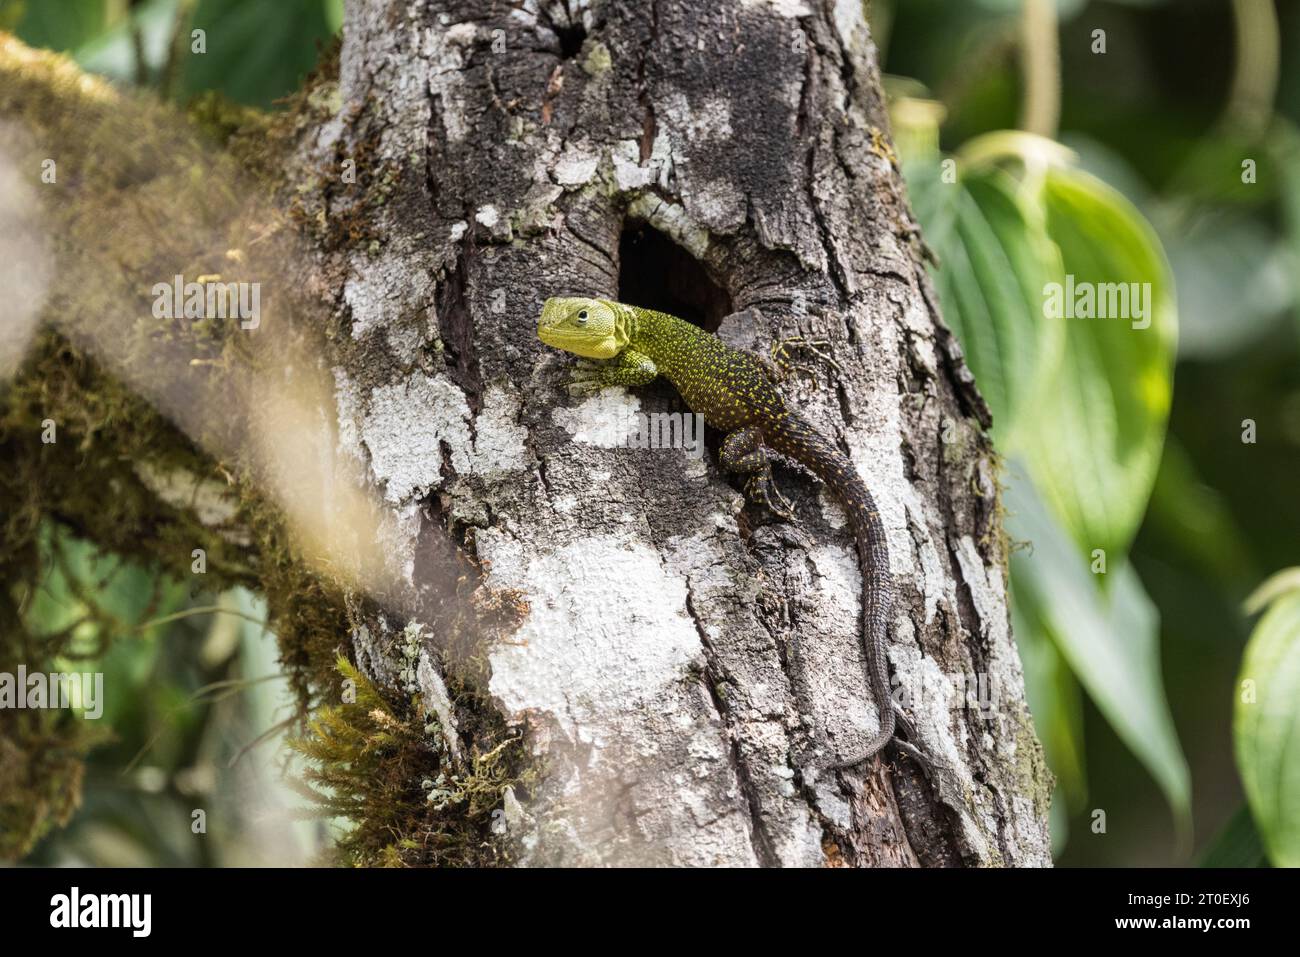 A sideview of the endangered Keeled/Mist Whorltailed Iguana (Stenocercus varius) on a tree in Ecaudor Stock Photo